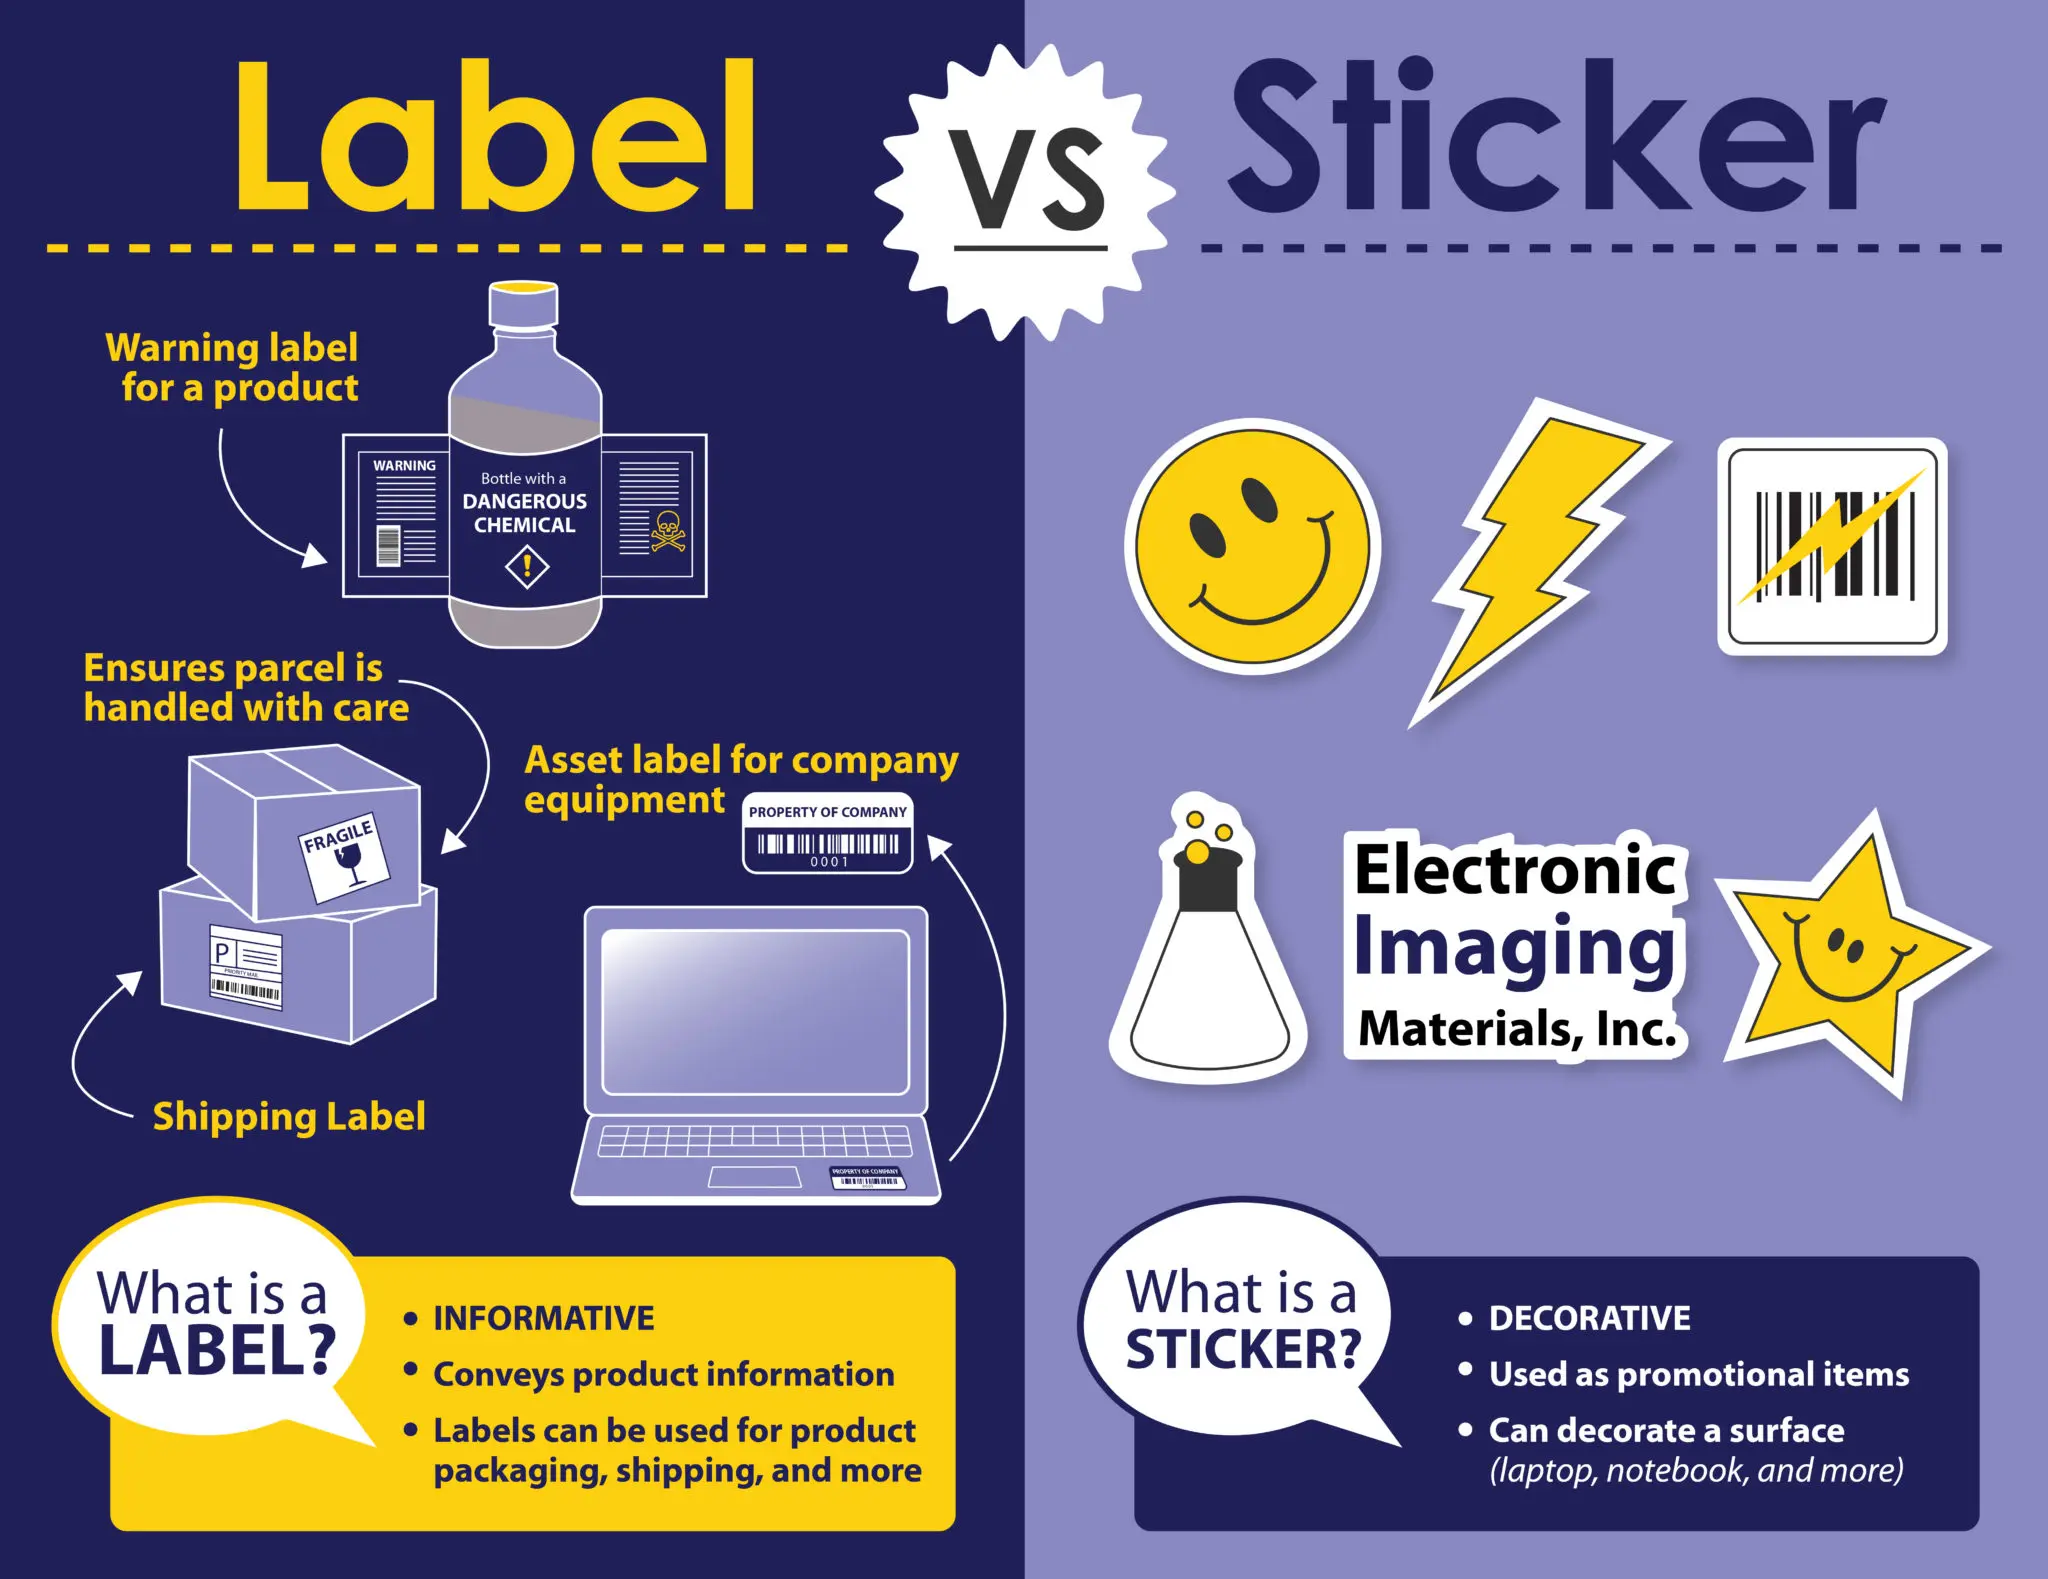 The difference between a label and a sticker